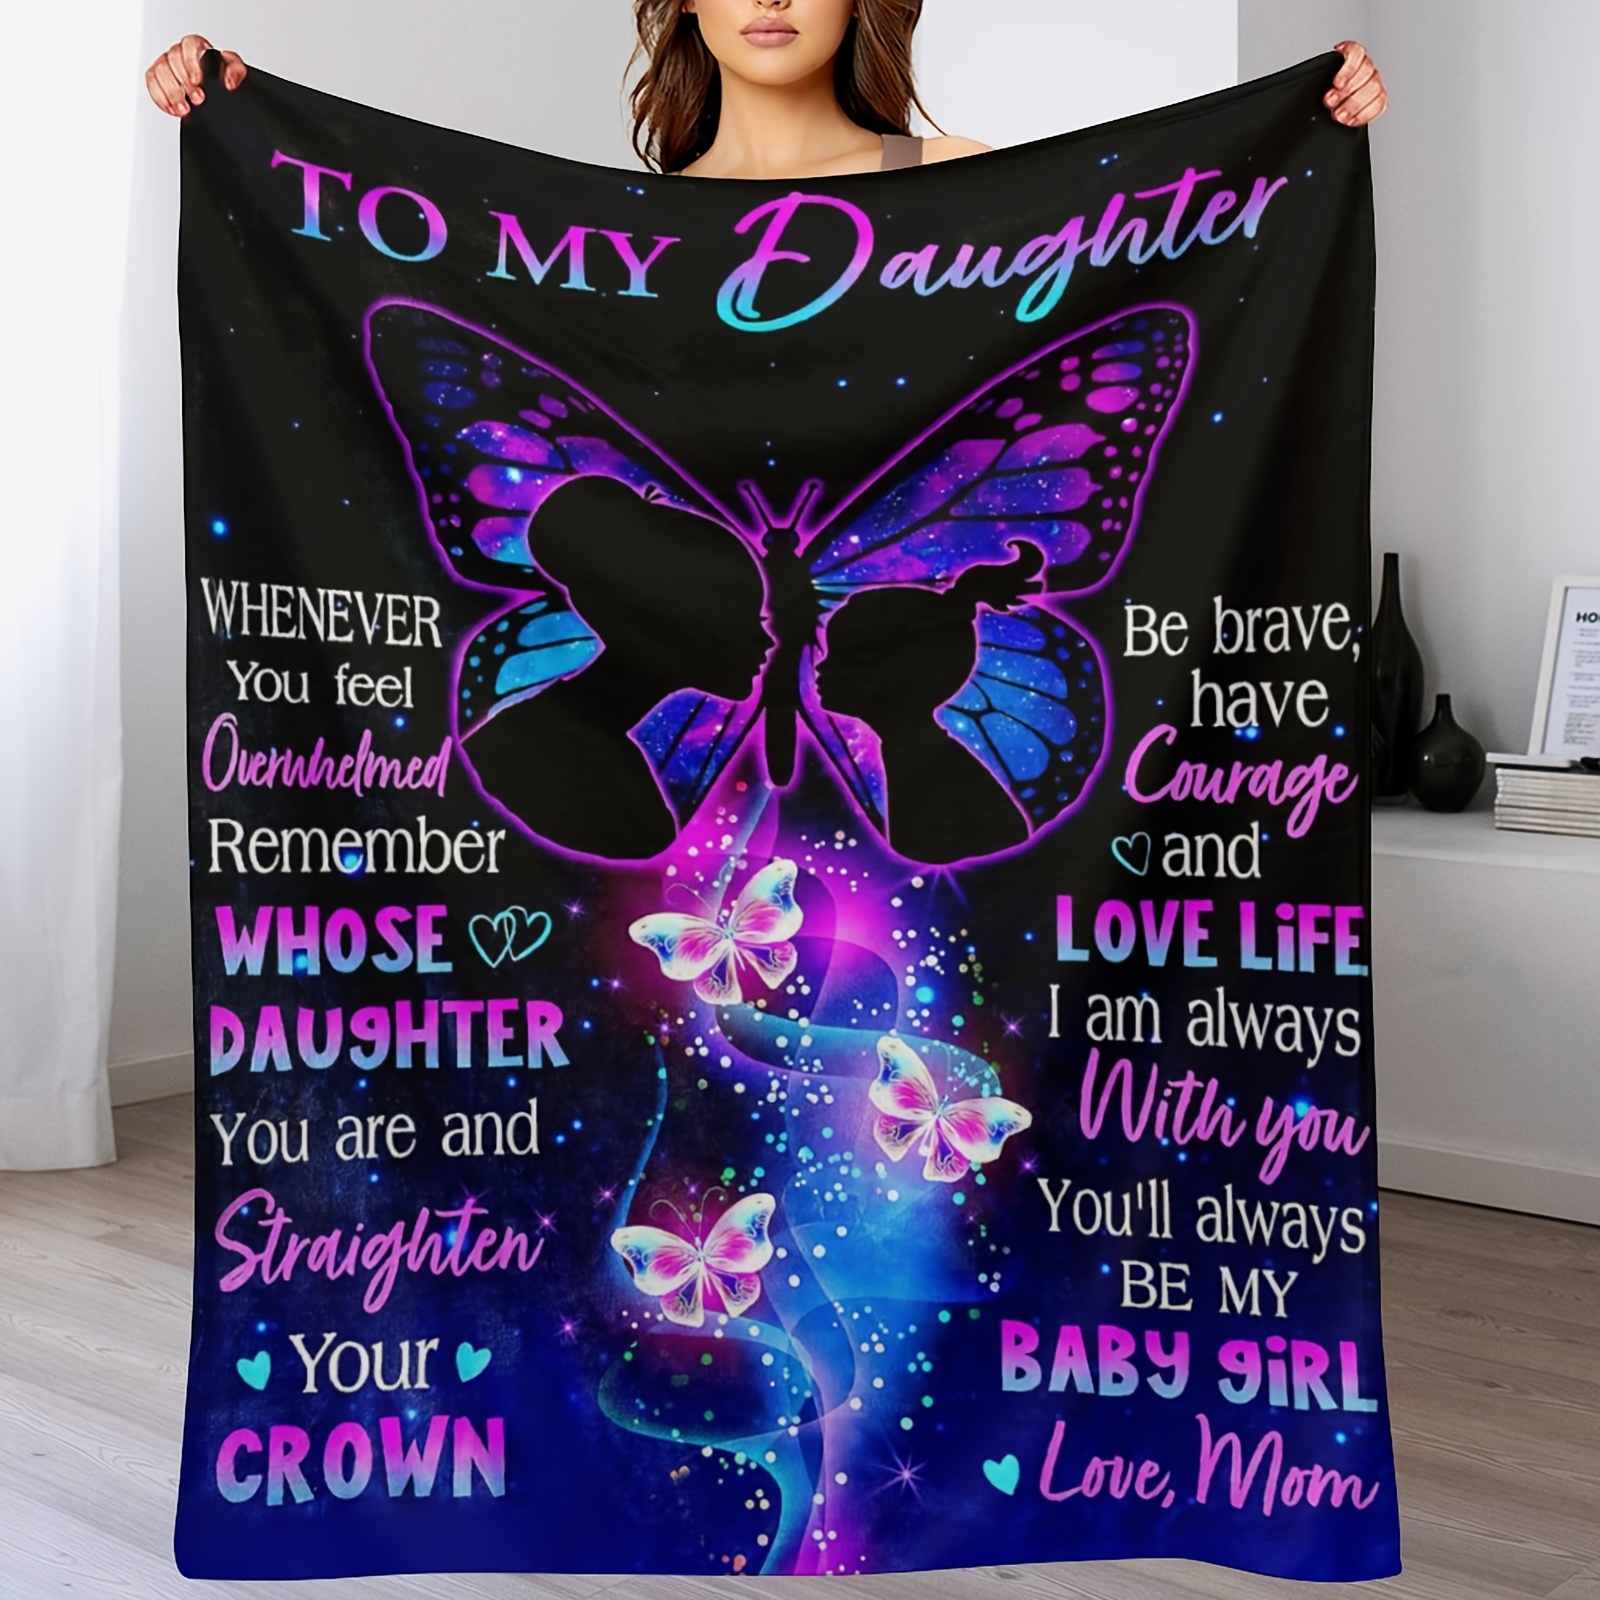 

Daughter's Gifts Of Blanket, Christmas, Birthday Gifts, Gifts From Mom To Daughter, Gifts For Daughter, Birthday Gifts For Daughter, Throw Blanket